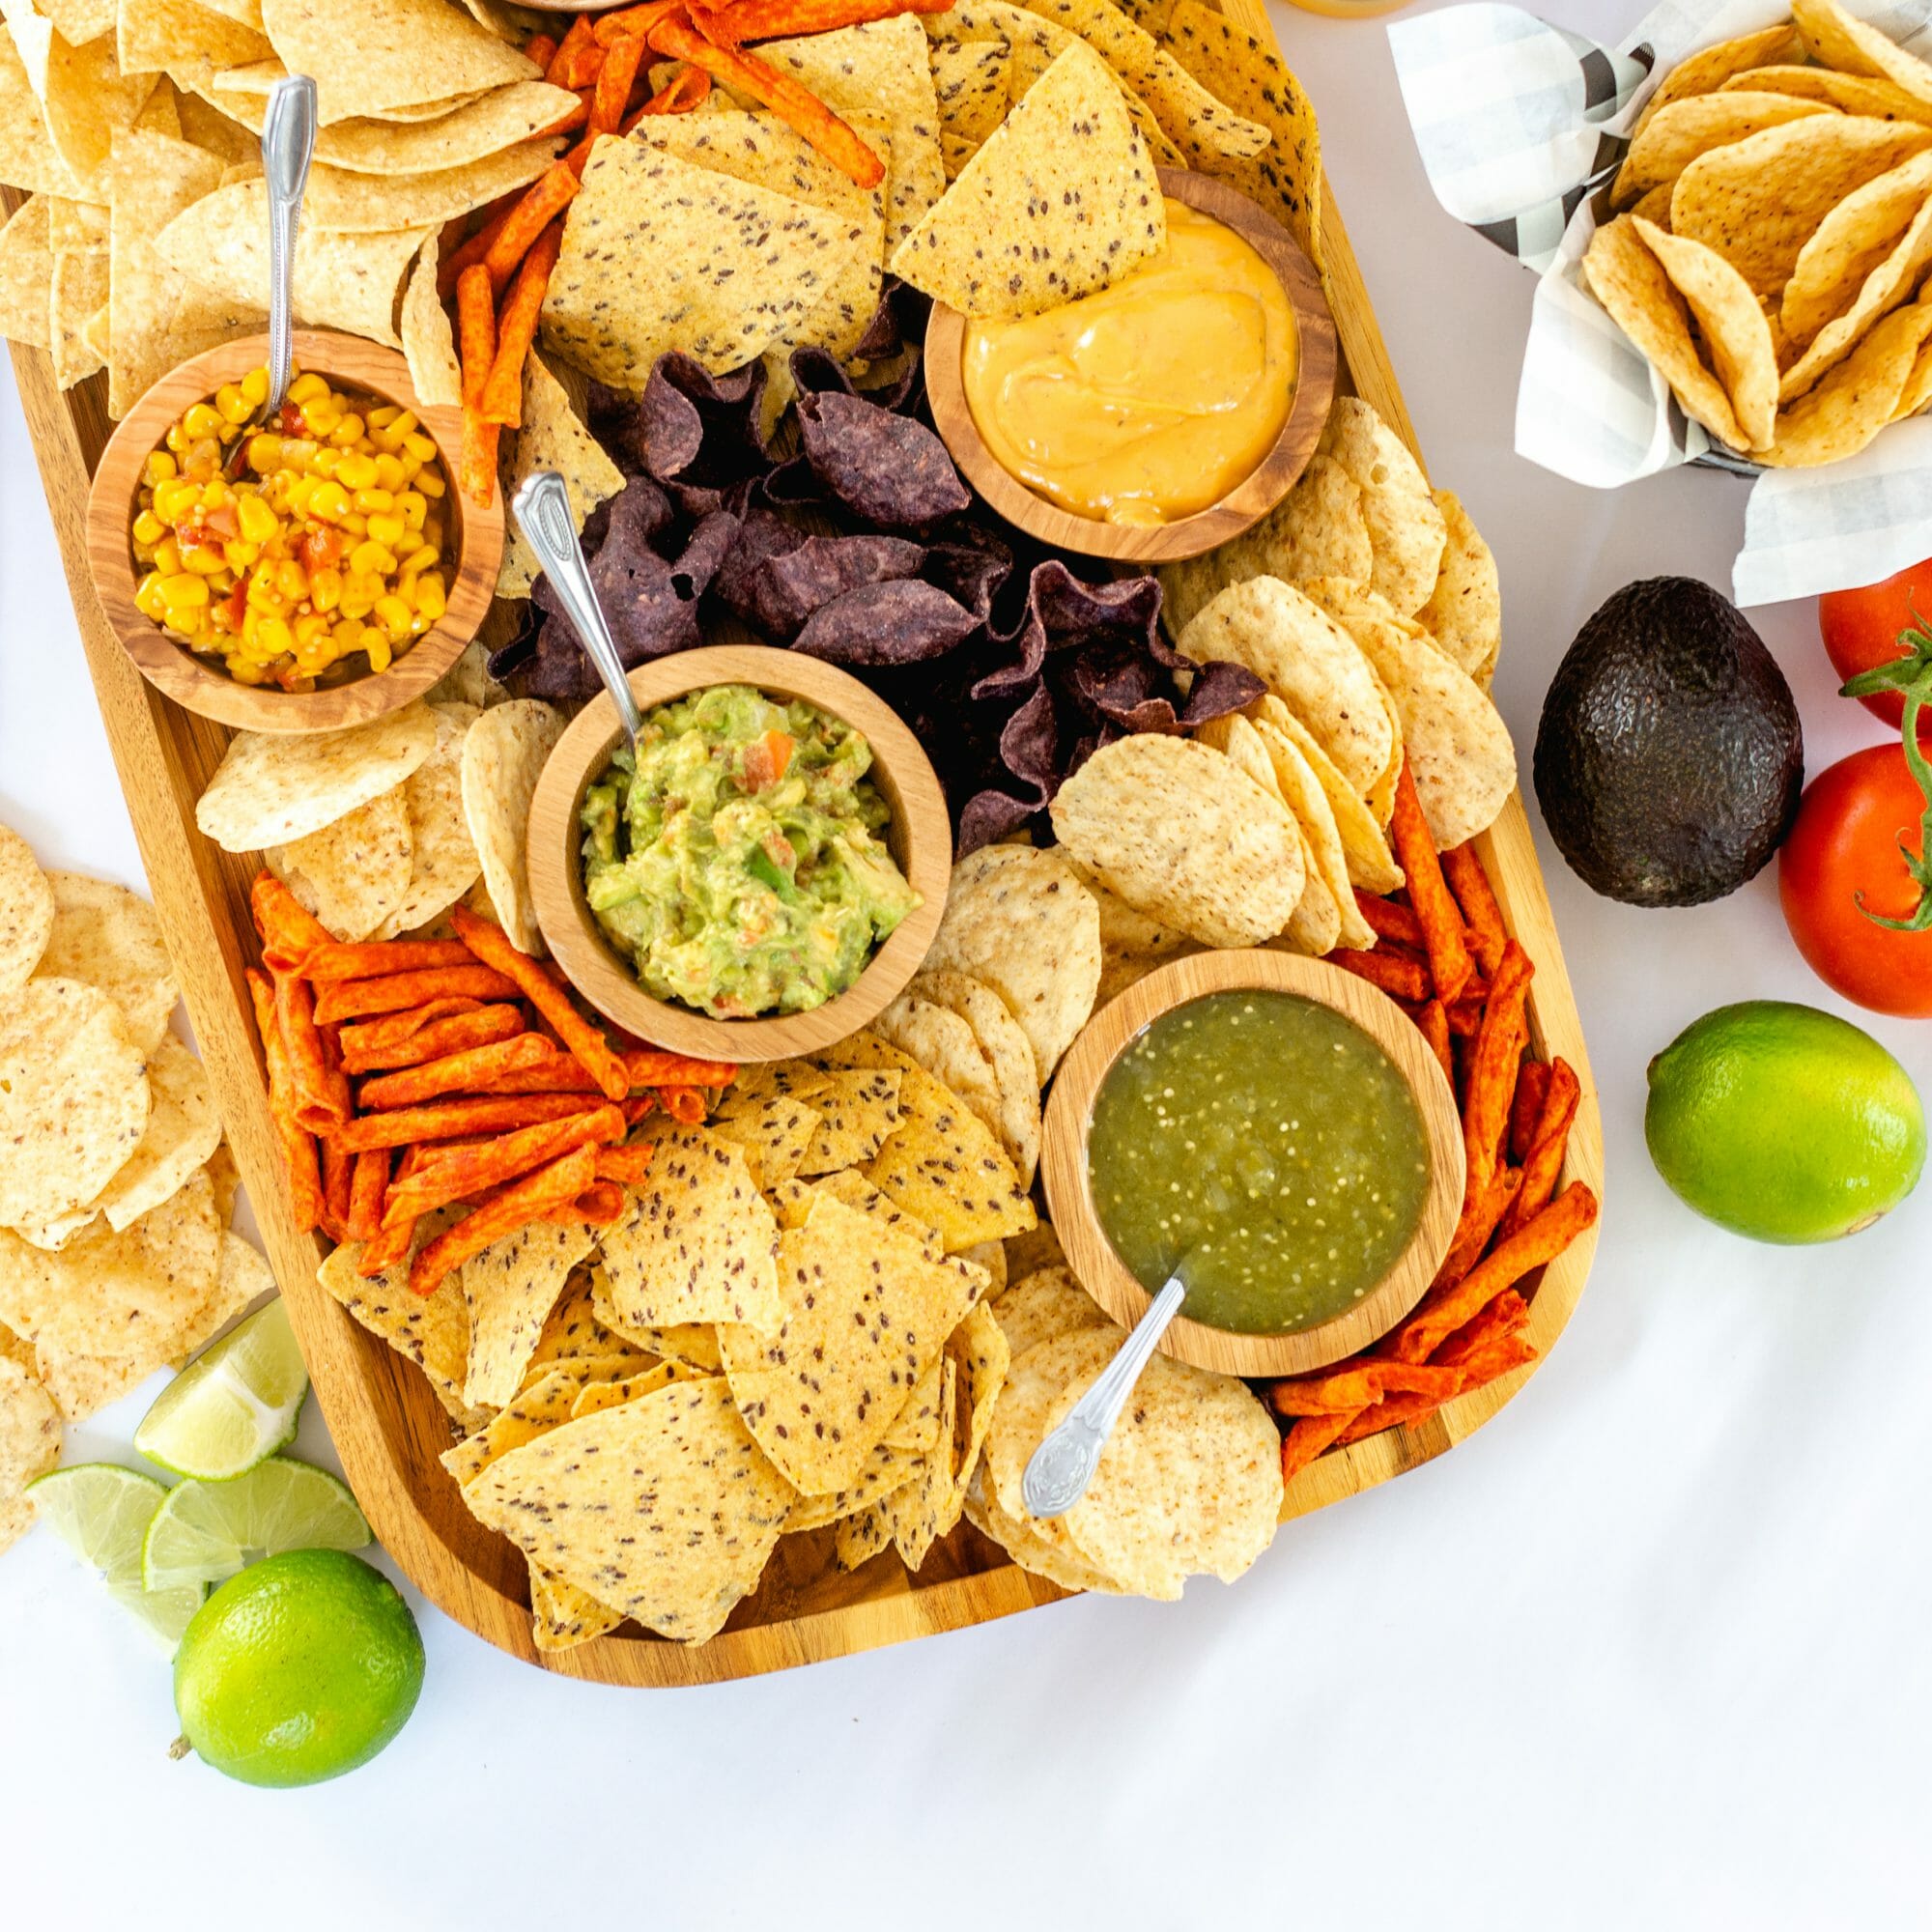 The Ultimate Super Bowl Spread | how to host a super bowl party | super bowl party ideas || JennyCookies.com #superbowl #superbowlparty #superbowlfood #partyideas #jennycookies